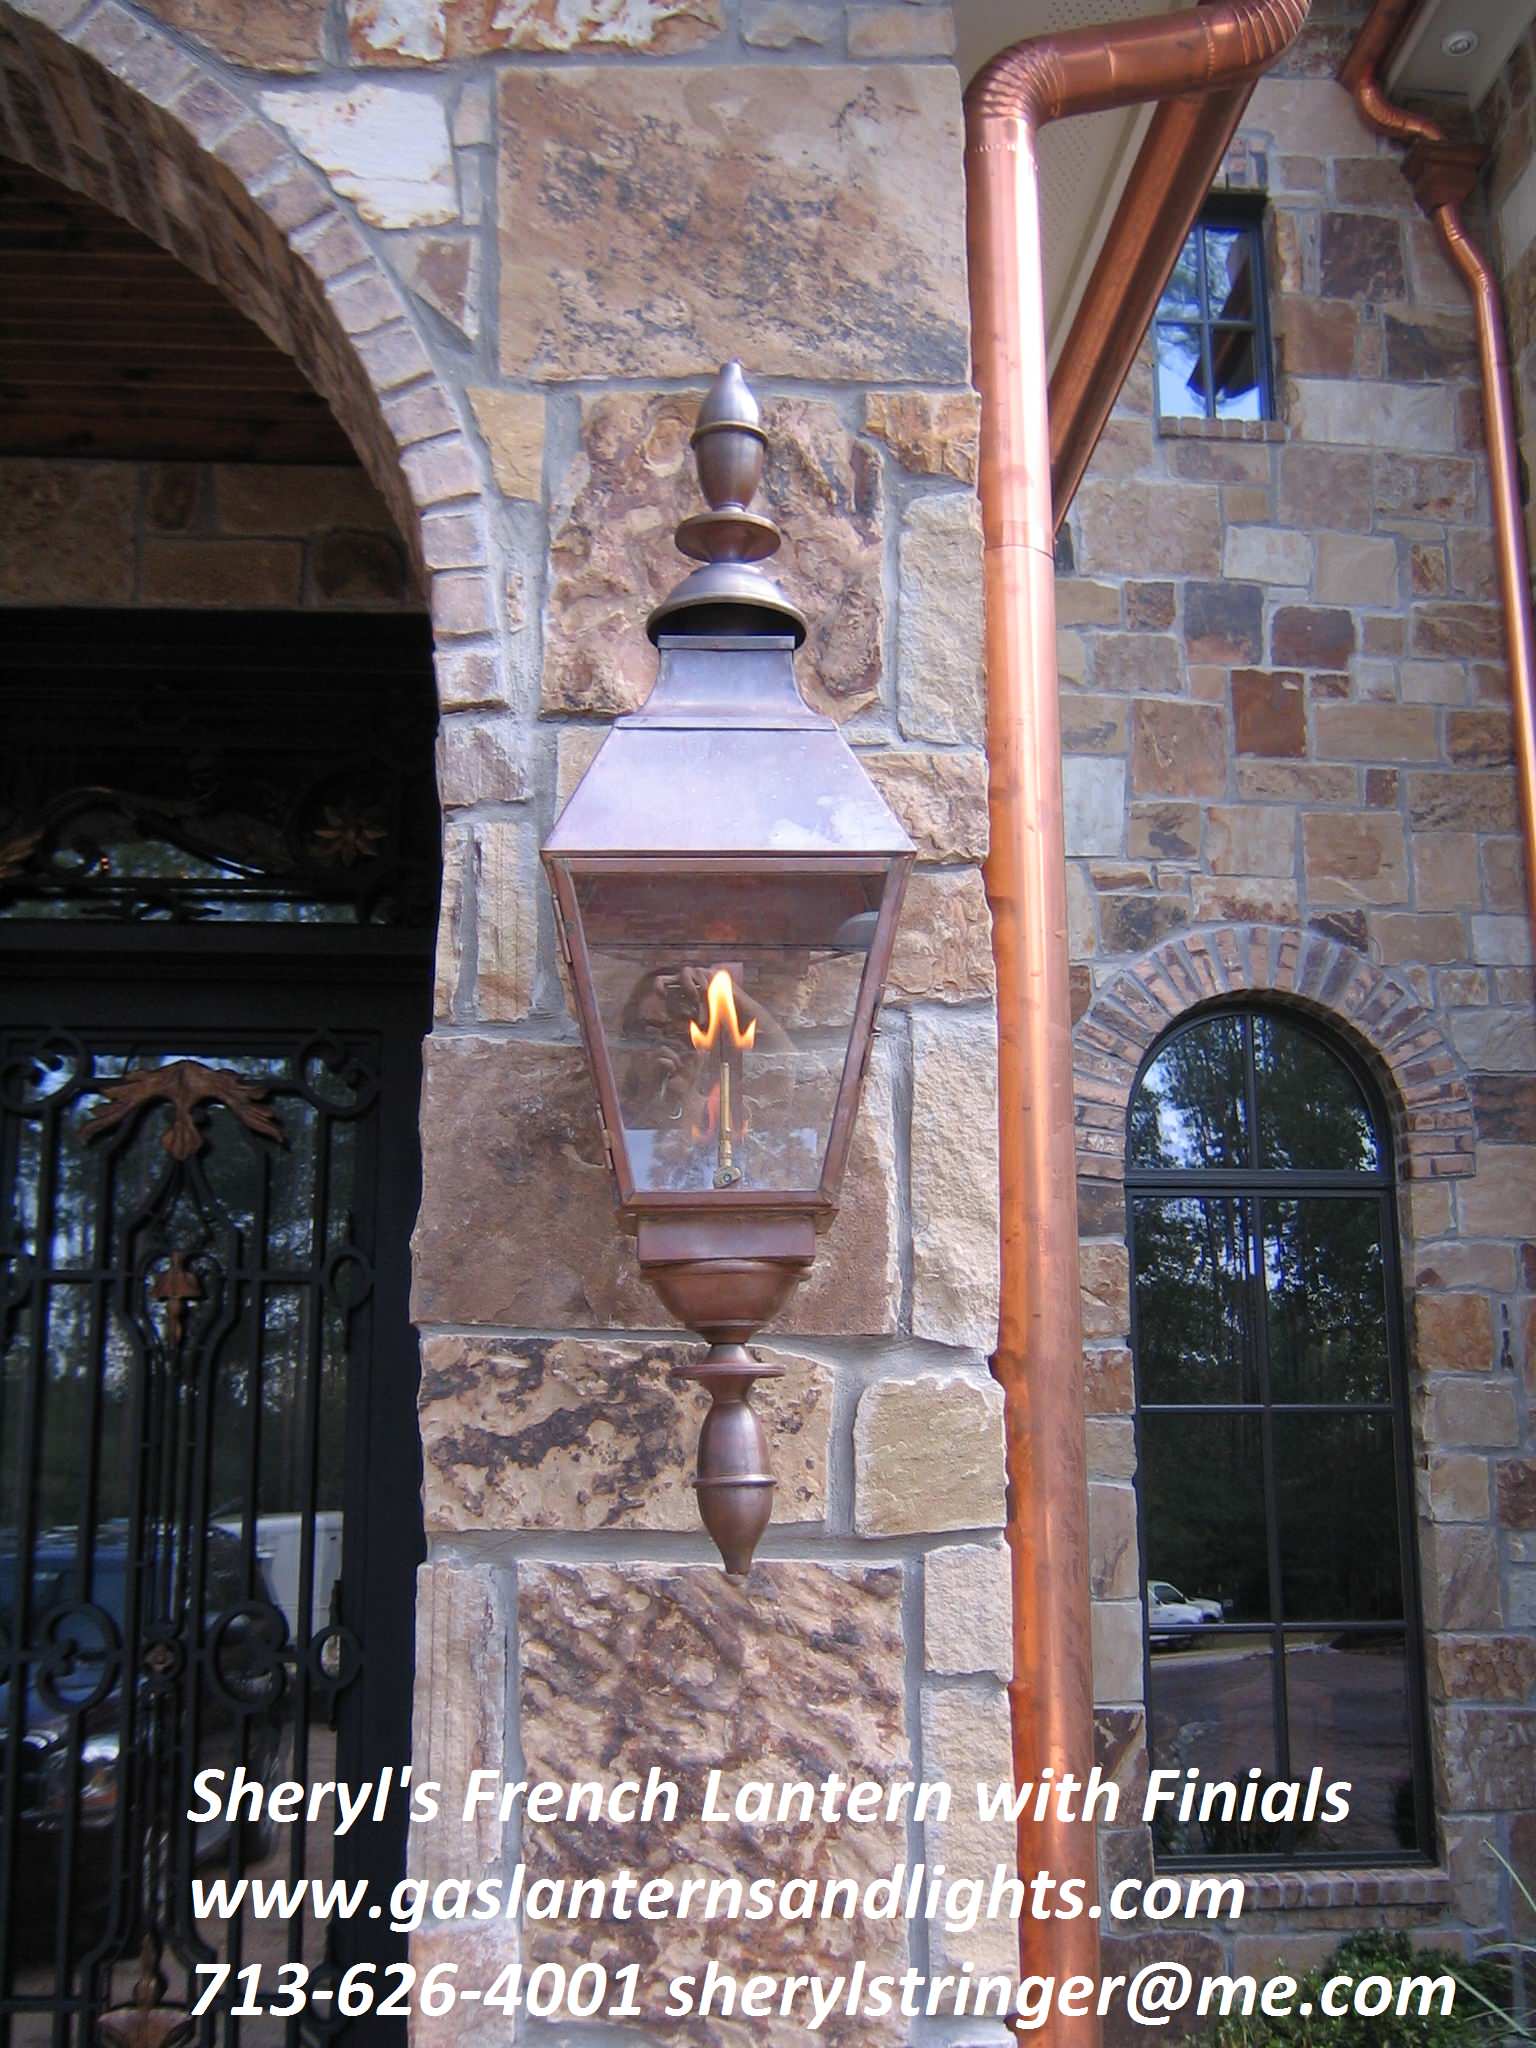 Sheryl's French Gas Lantern with Fnials